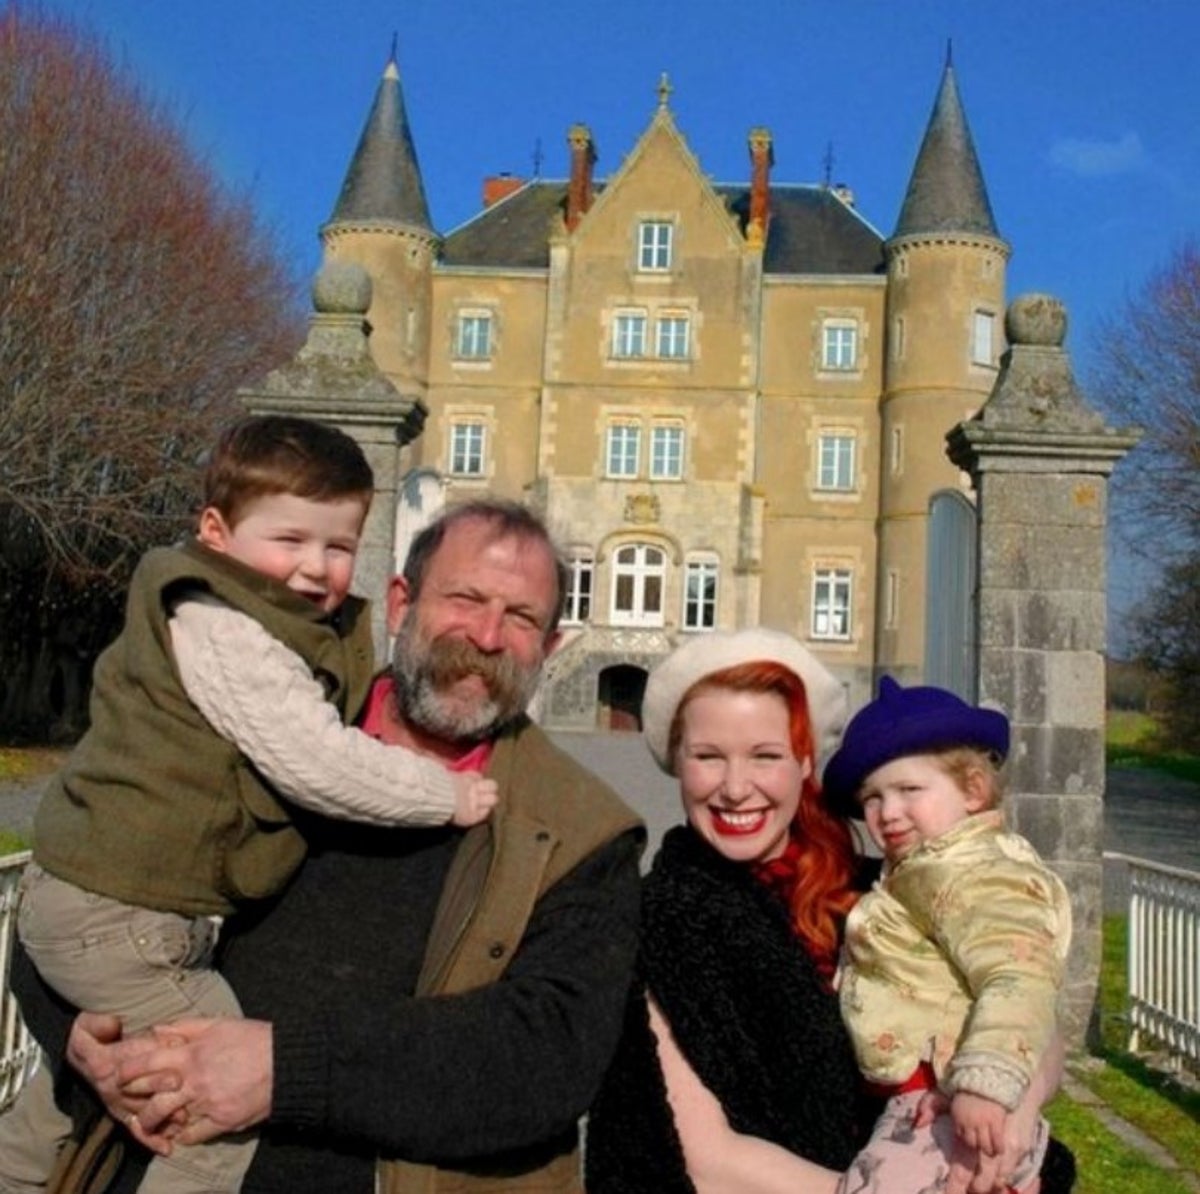 Meet Dick and Angel Strawbridge, the unconventional couple behind Escape to the Chateau